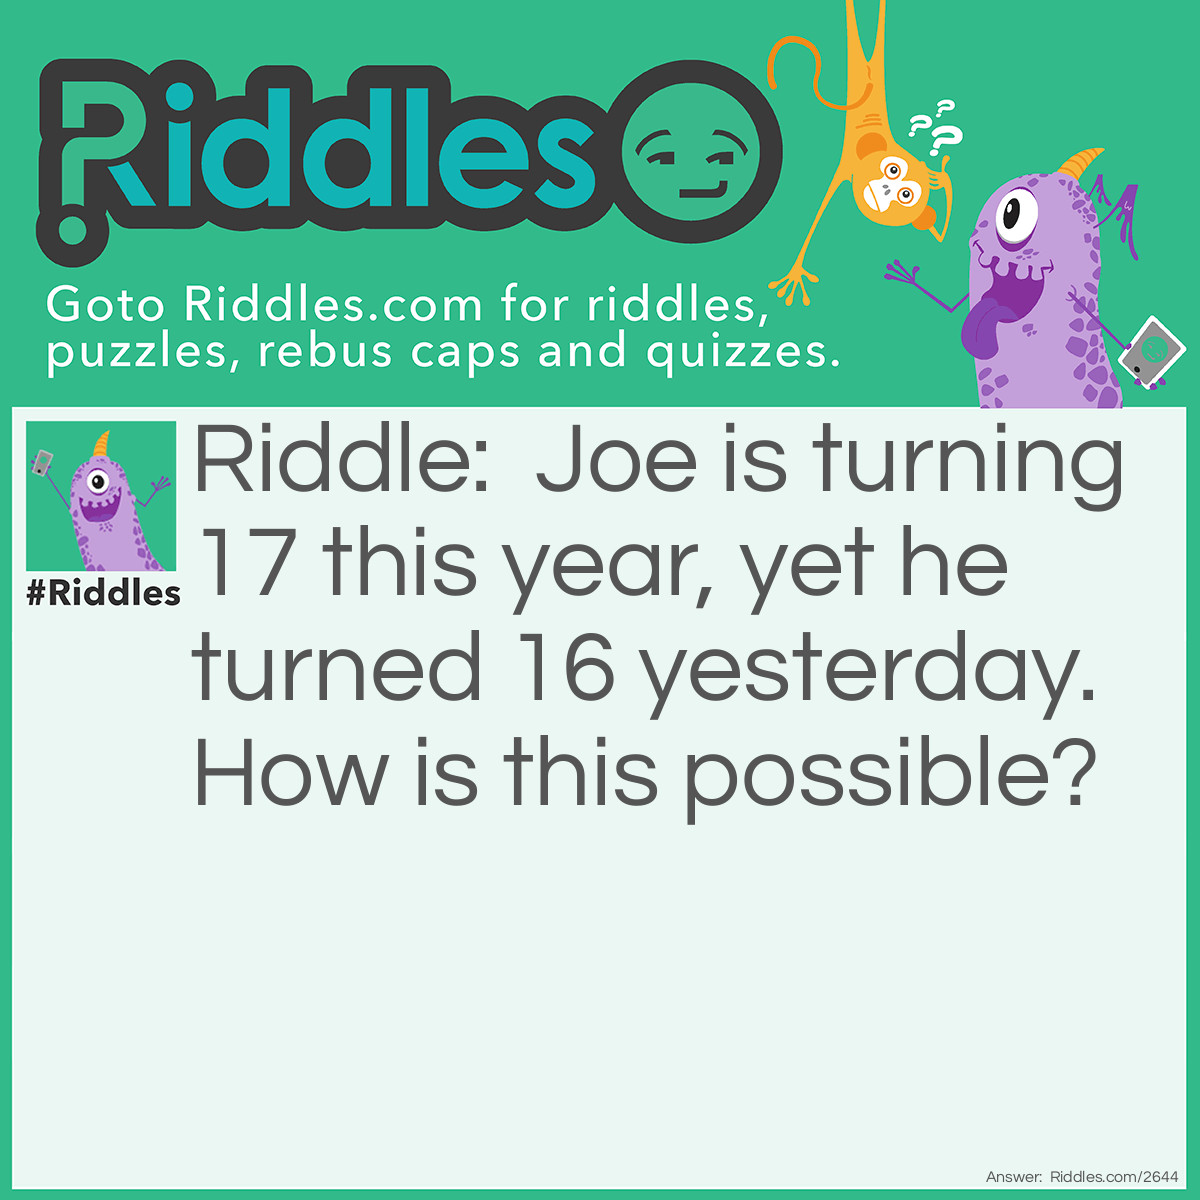 Riddle: Joe is turning 17 this year, yet he turned 16 yesterday. How is this possible? Answer: Joe's birthday is on December 31, the last day of the year. The current day was January 1st of the next year.